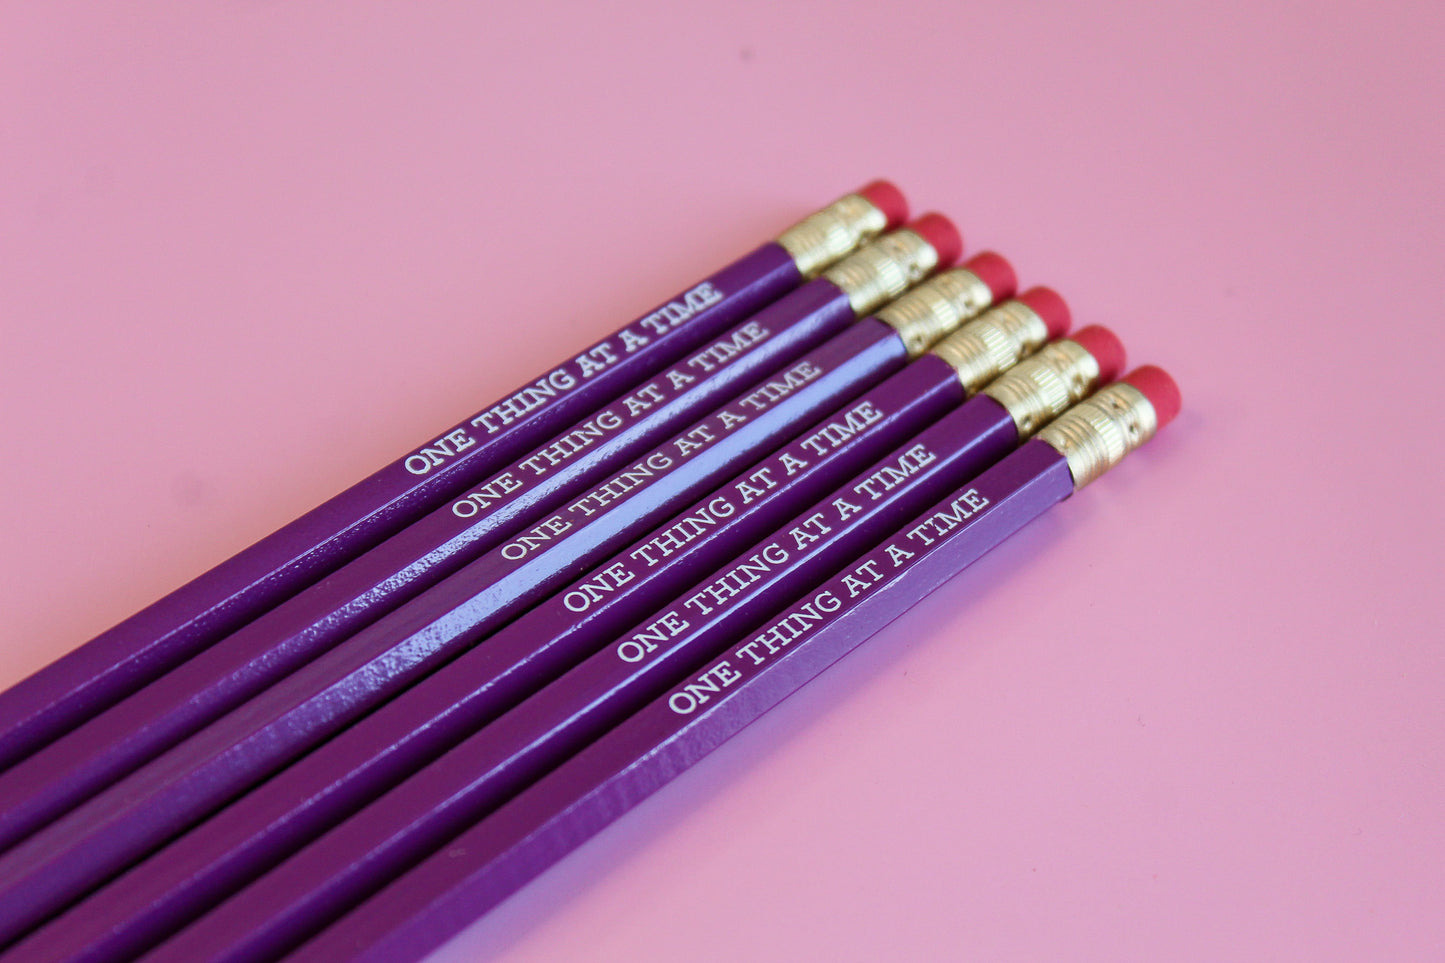 One Thing At A time pencil set, purple pencil set